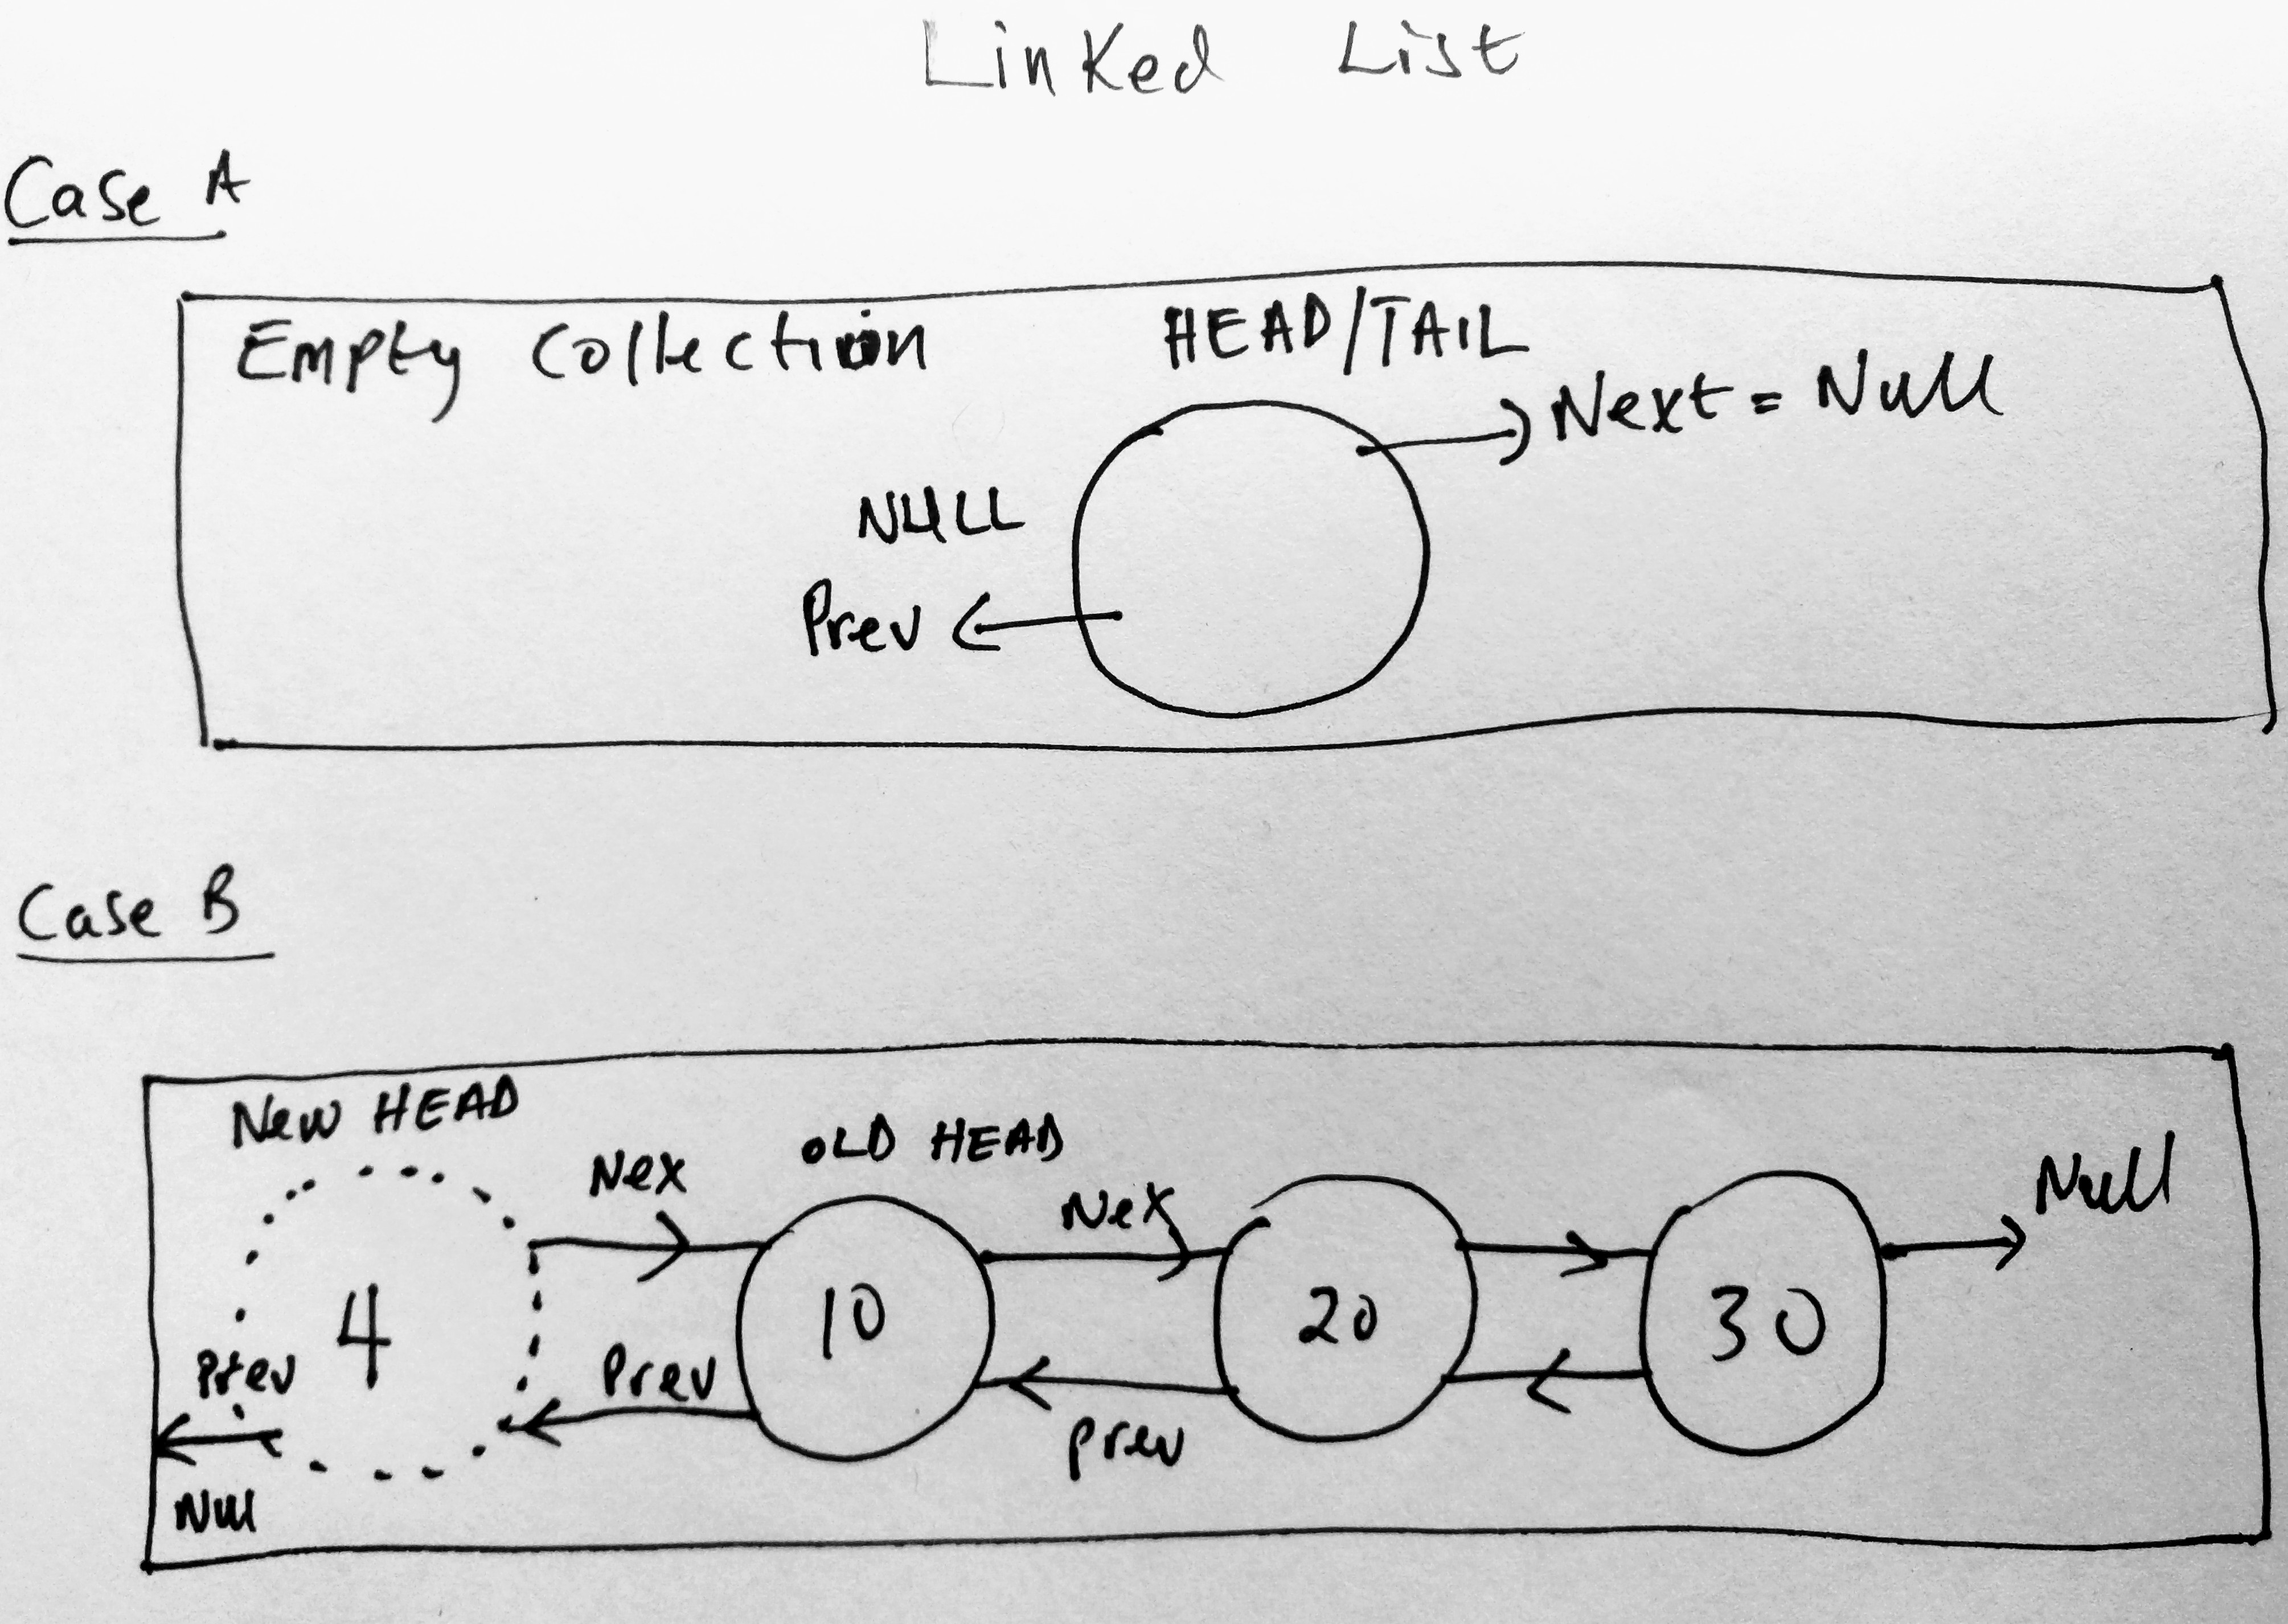 doubly linked list - add to head